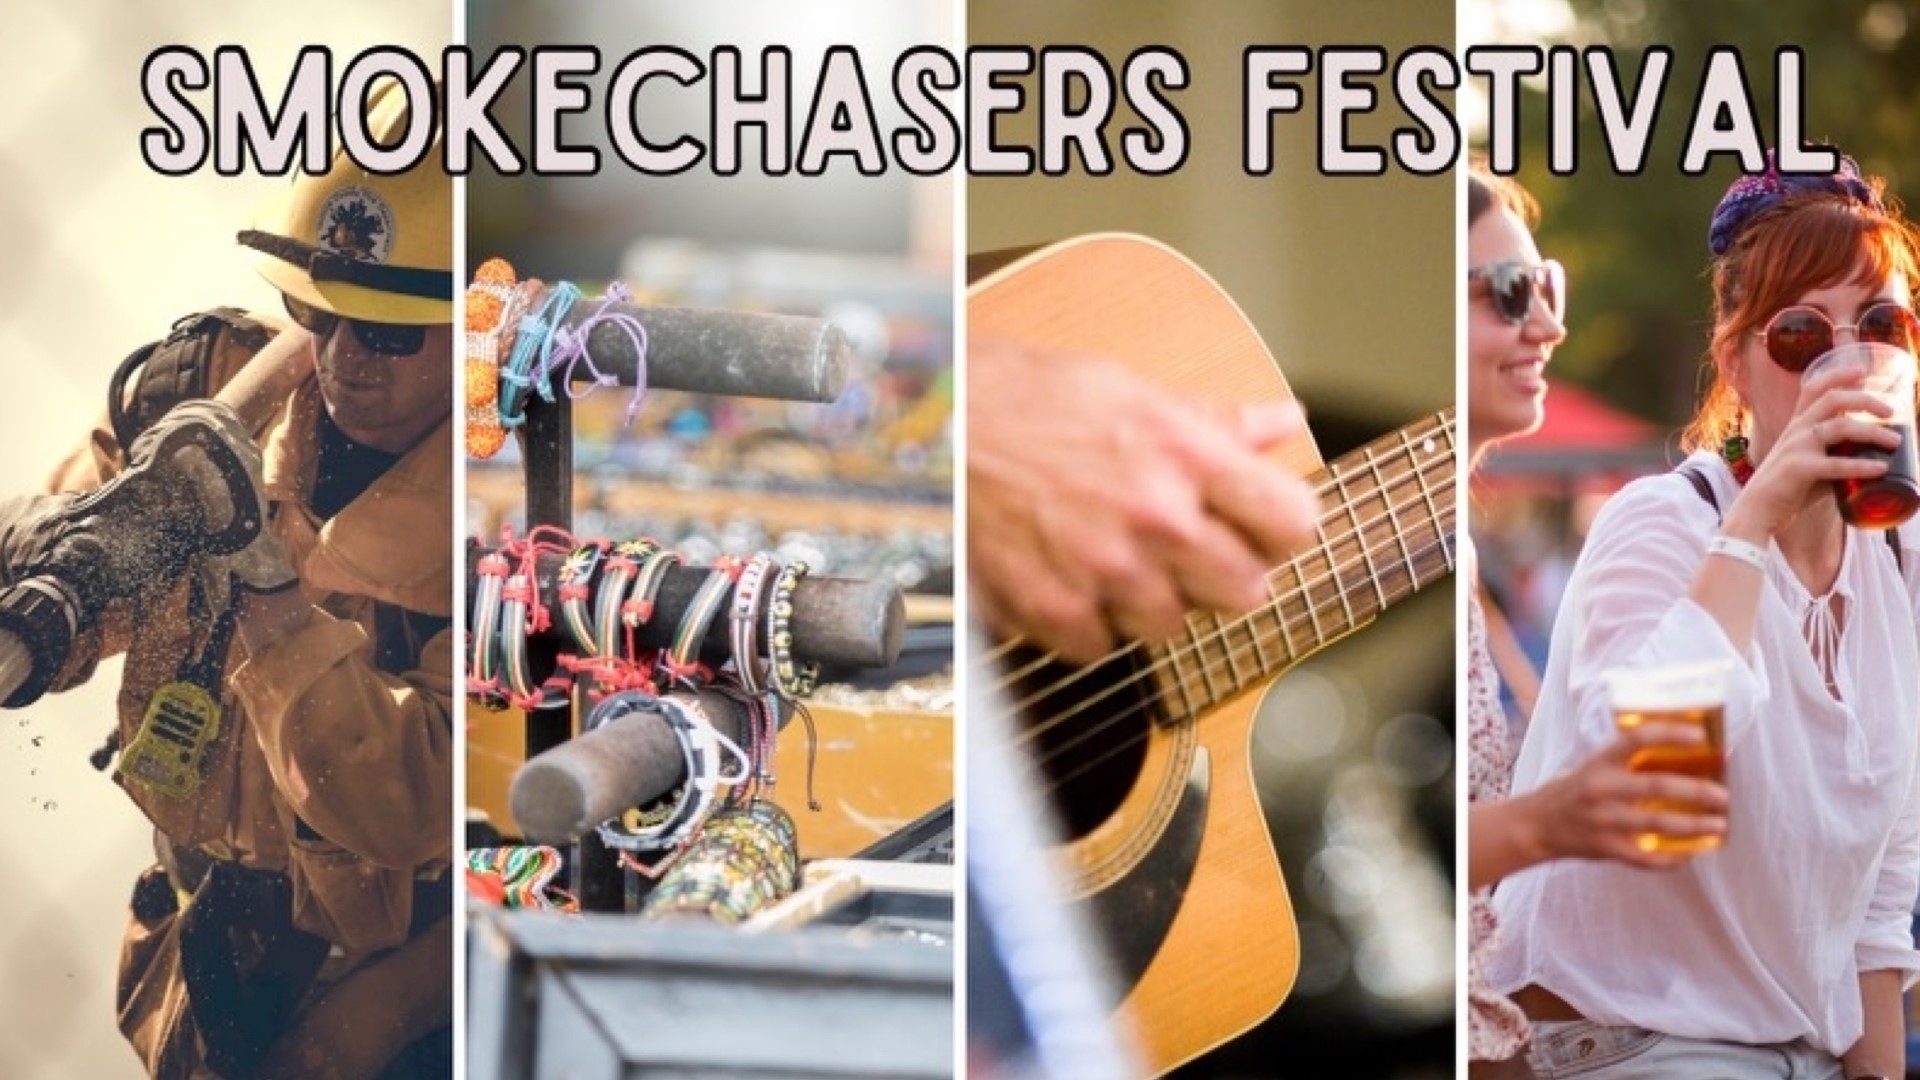 The 2nd annual Smokechasers Festival is coming up, offering food, run and music with a fire education twist.